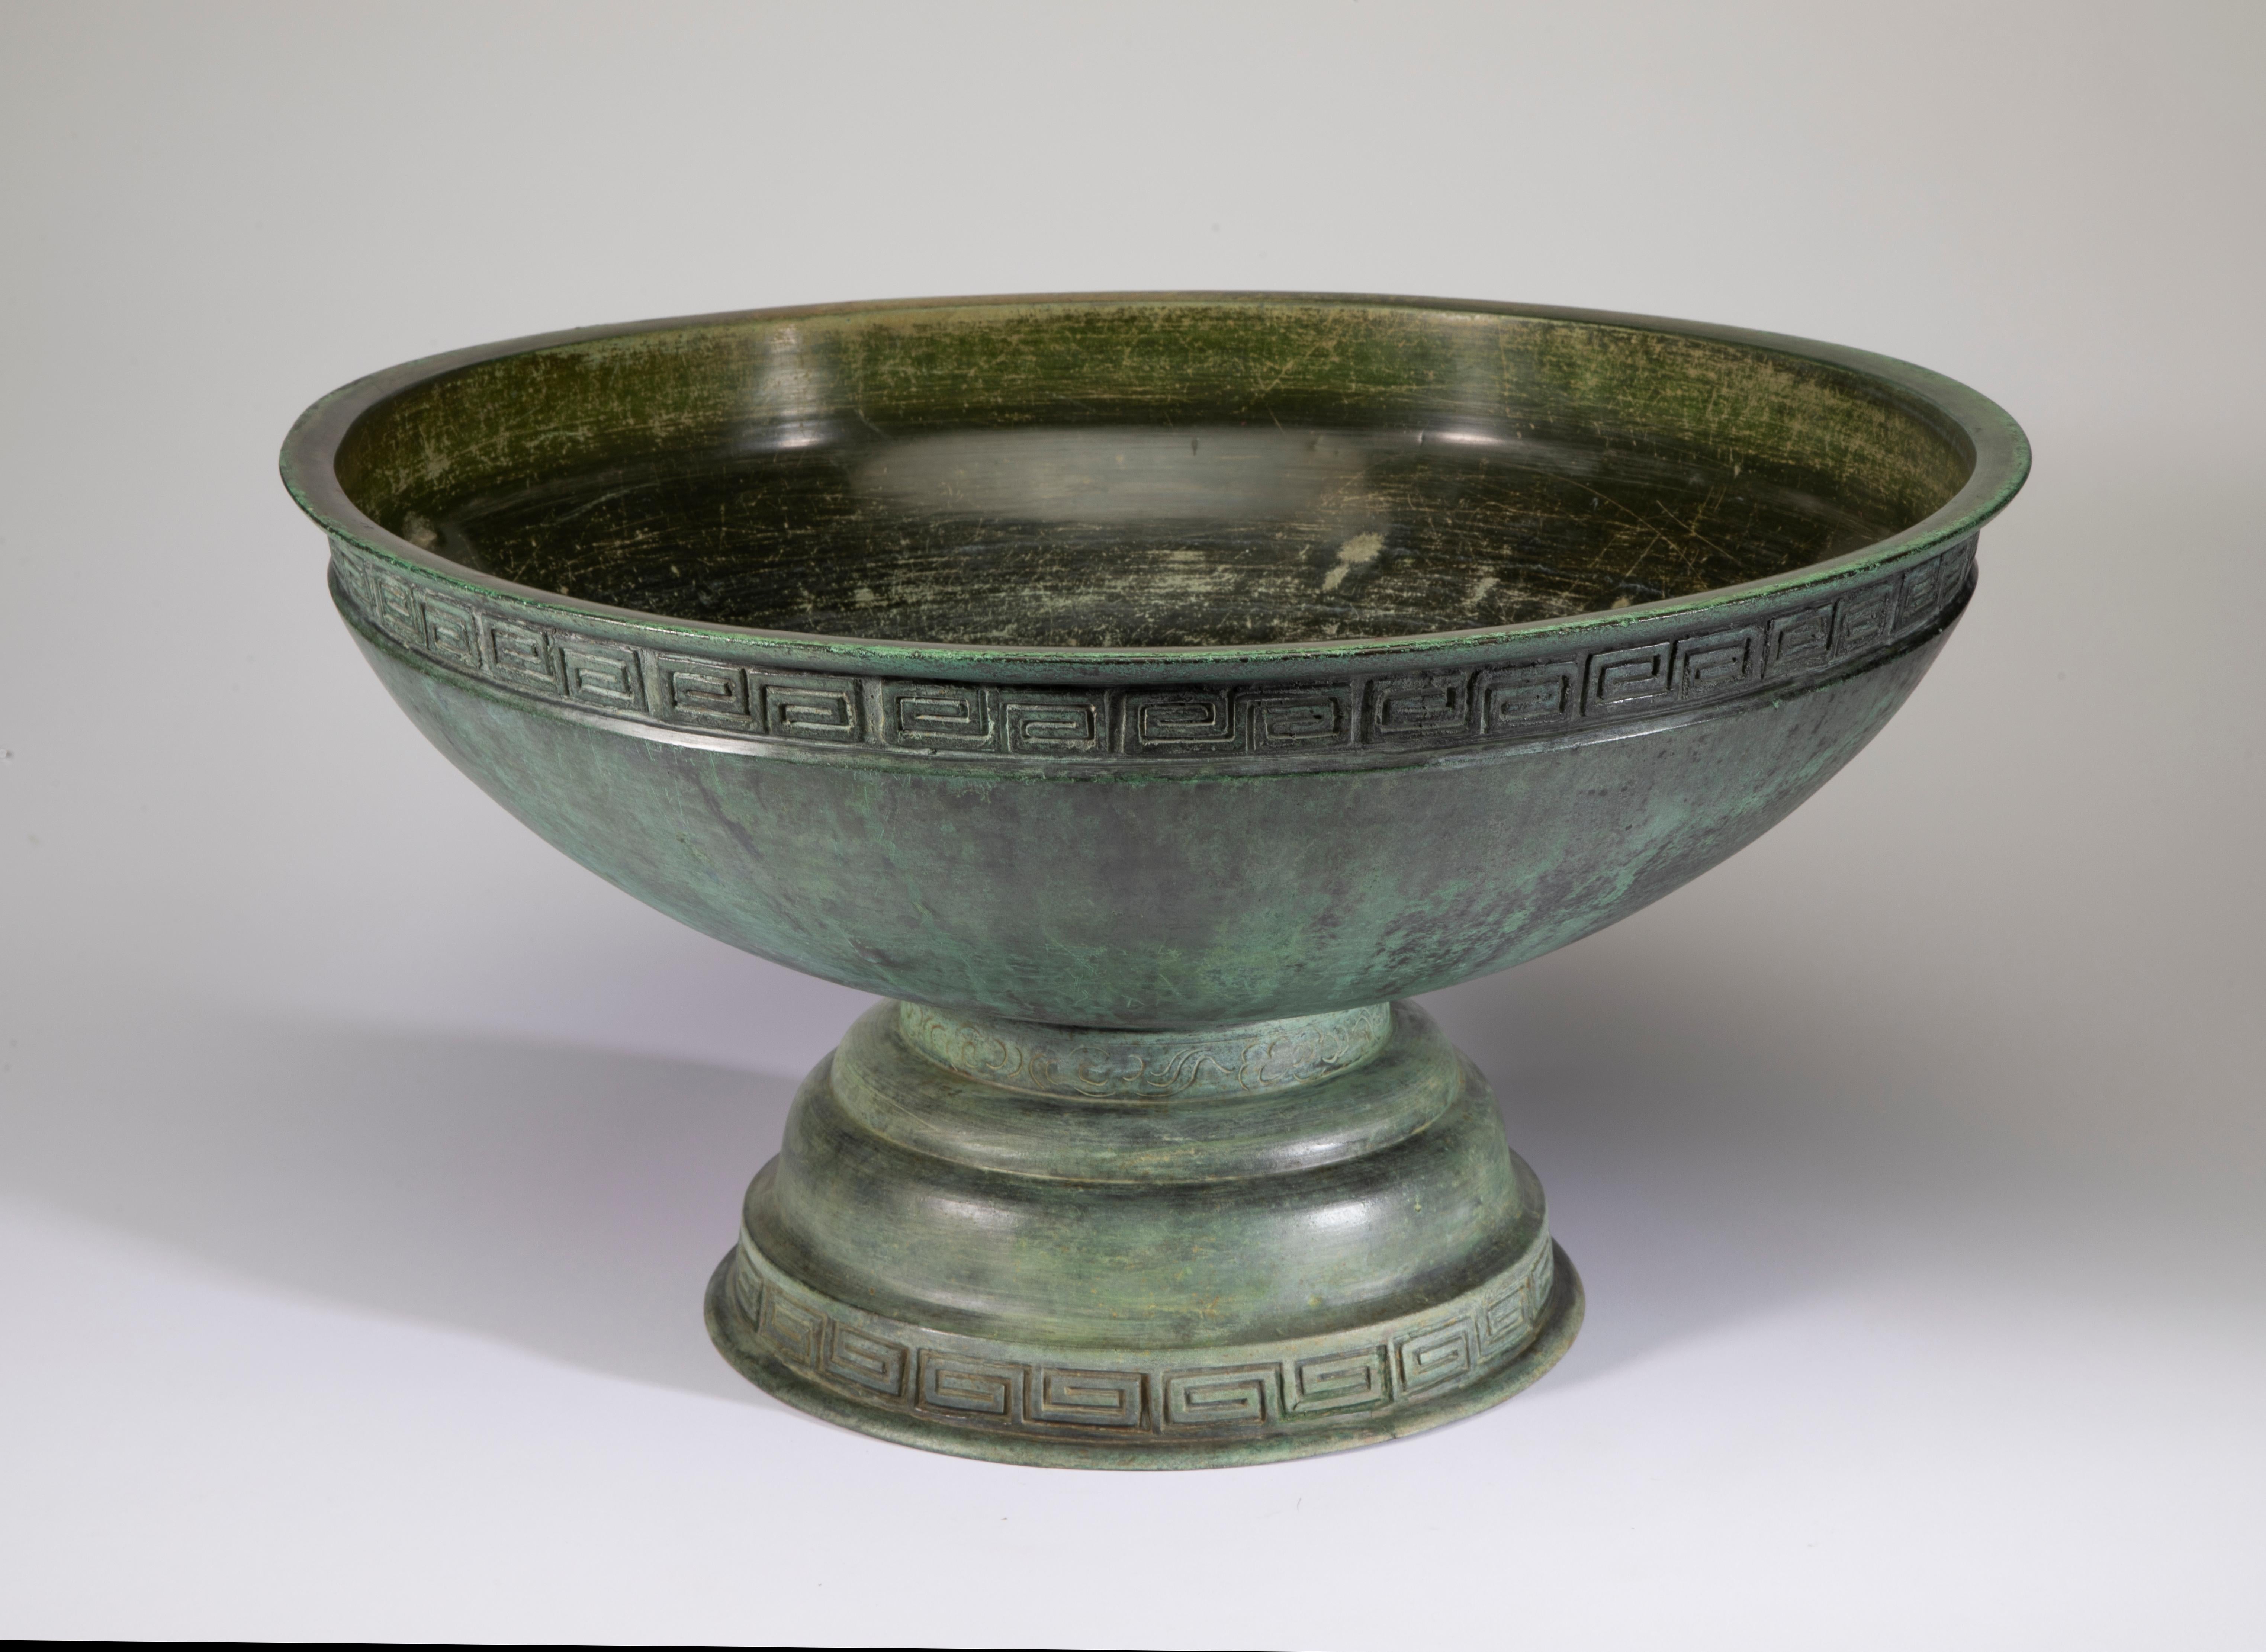 Antique Japanese bronze water bowl.
Beautiful water bowl and patina.
Hand-Crafted Design.
Mid Meiji 1868 - 1912.
Bowl top diameter 24 1/2